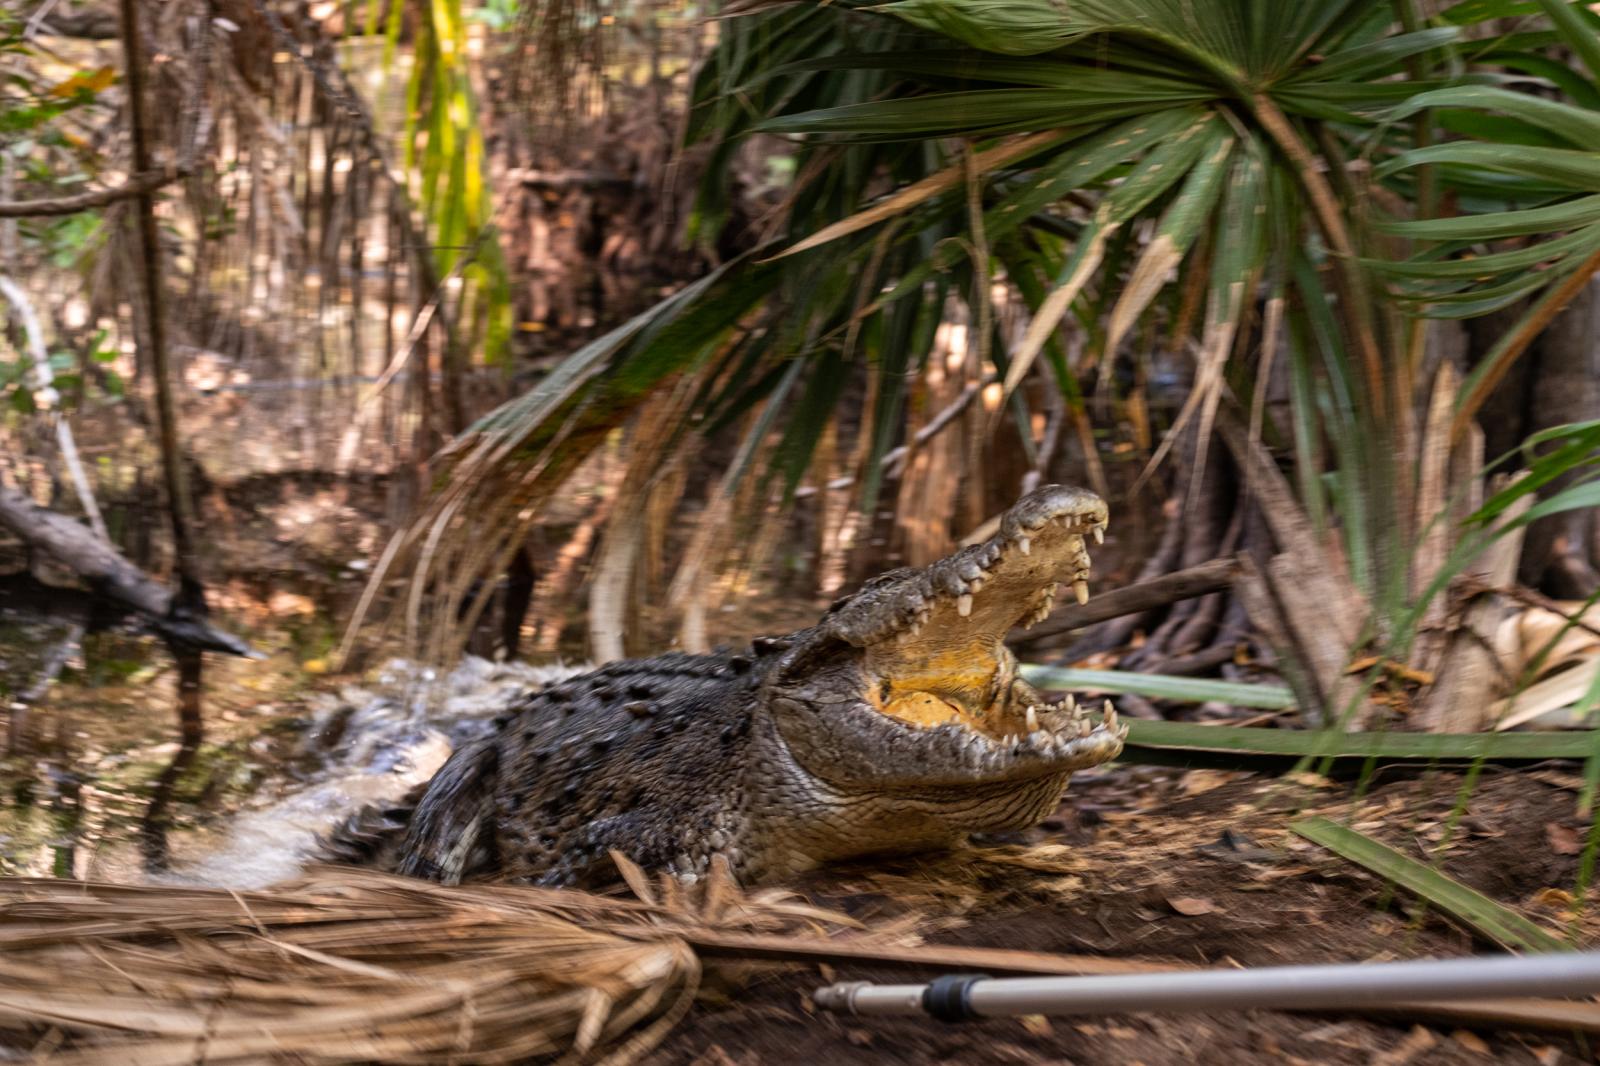 La Ventanilla: A window to coexisting with Crocodiles  - A nesting crocodile charges forward to defend its territory during a crocodile monitoring...